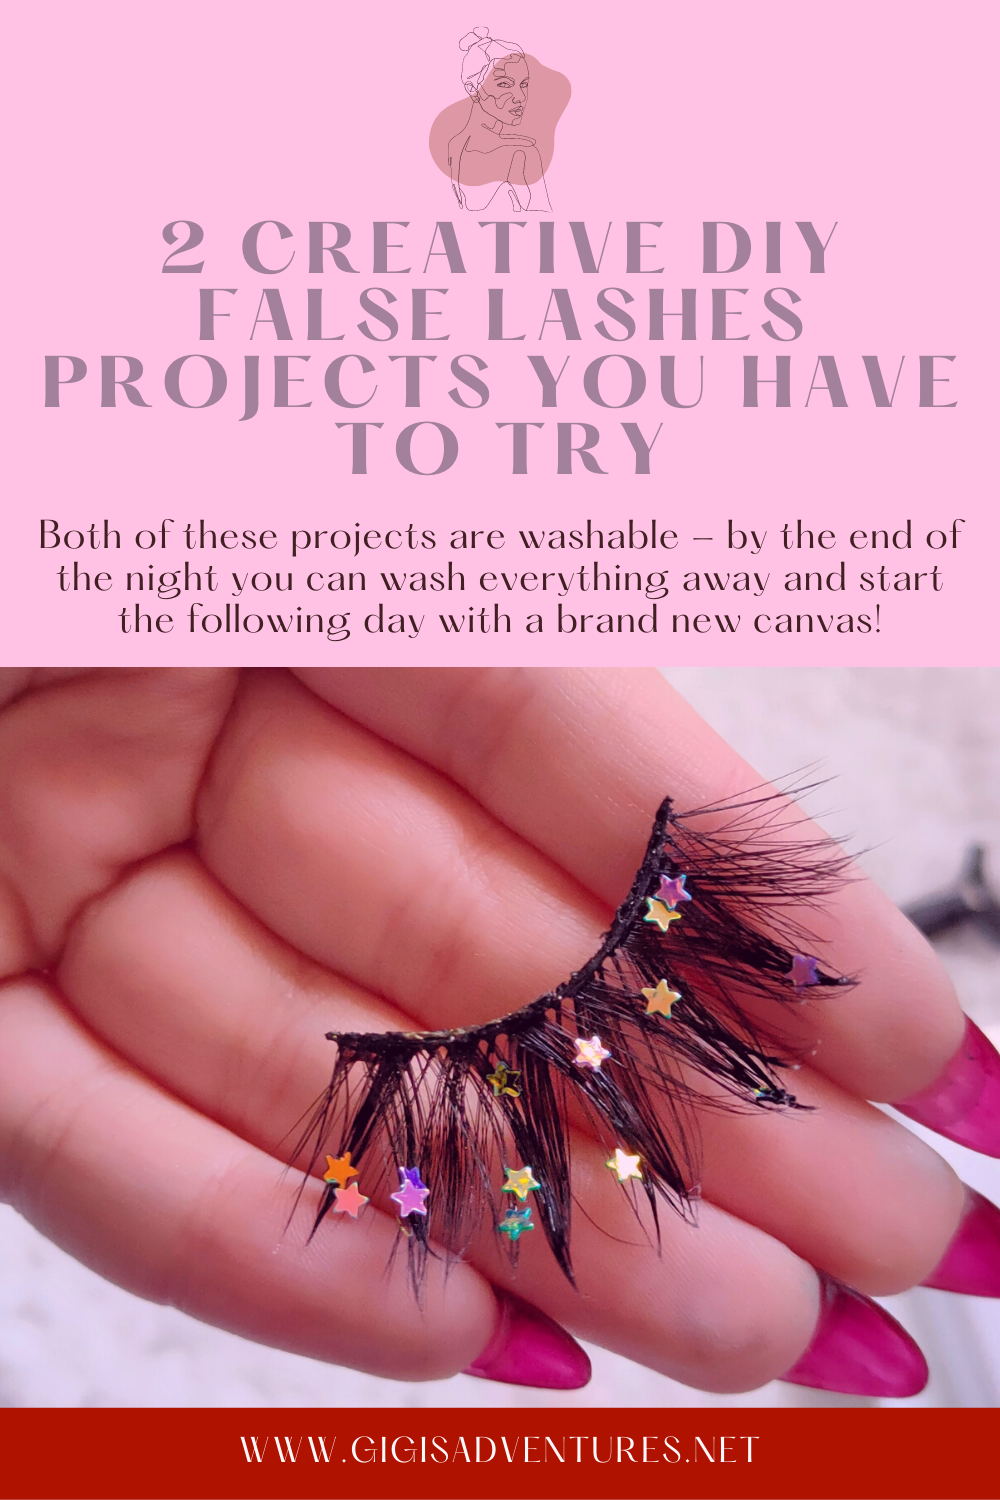 2 Creative DIY False Lashes Projects You Have To Try